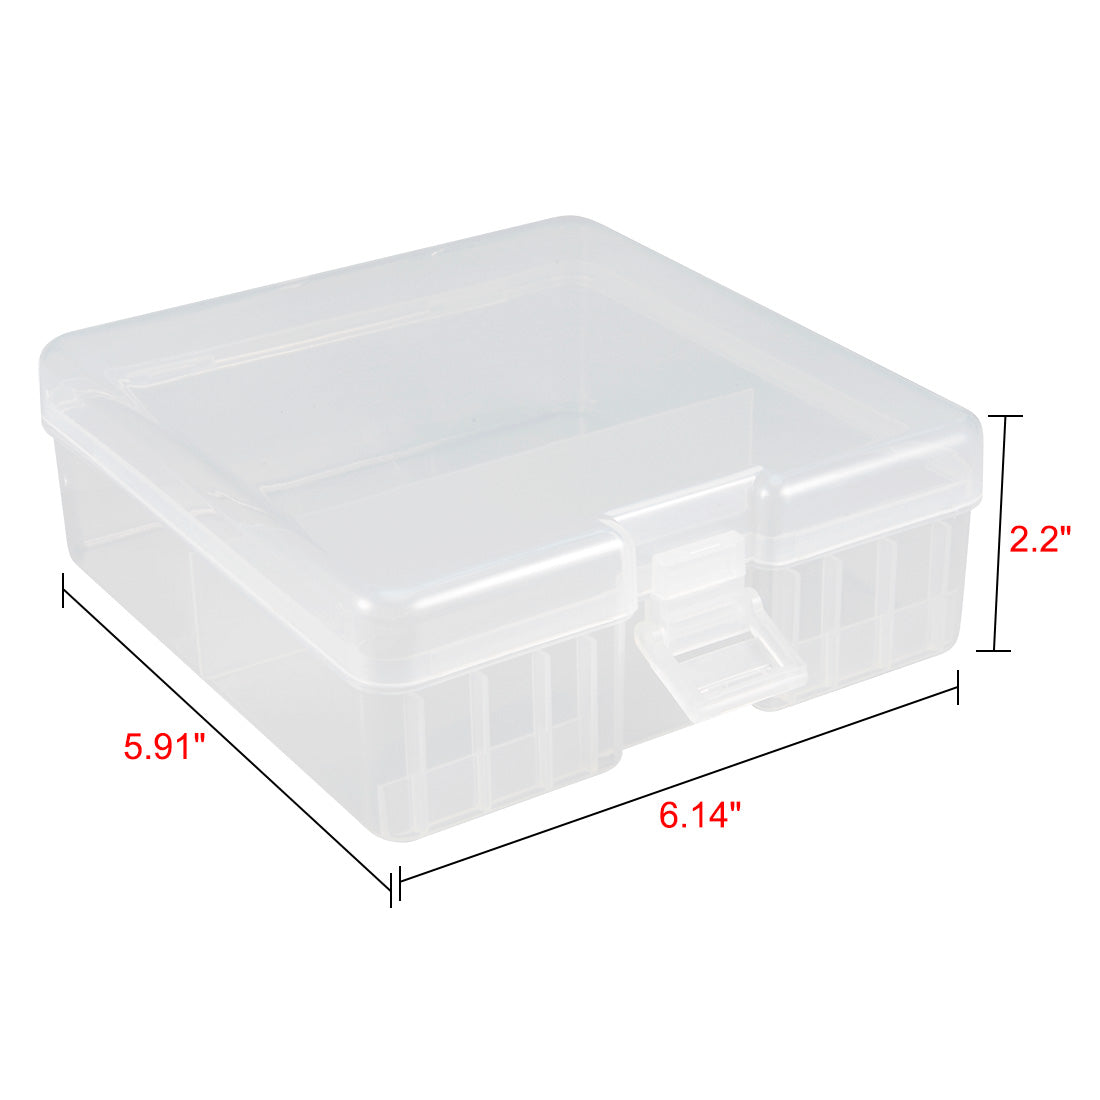 uxcell Uxcell Portable Battery Storage Box Protective Container Transparent for AAA/AA/C/D/9V batteries.